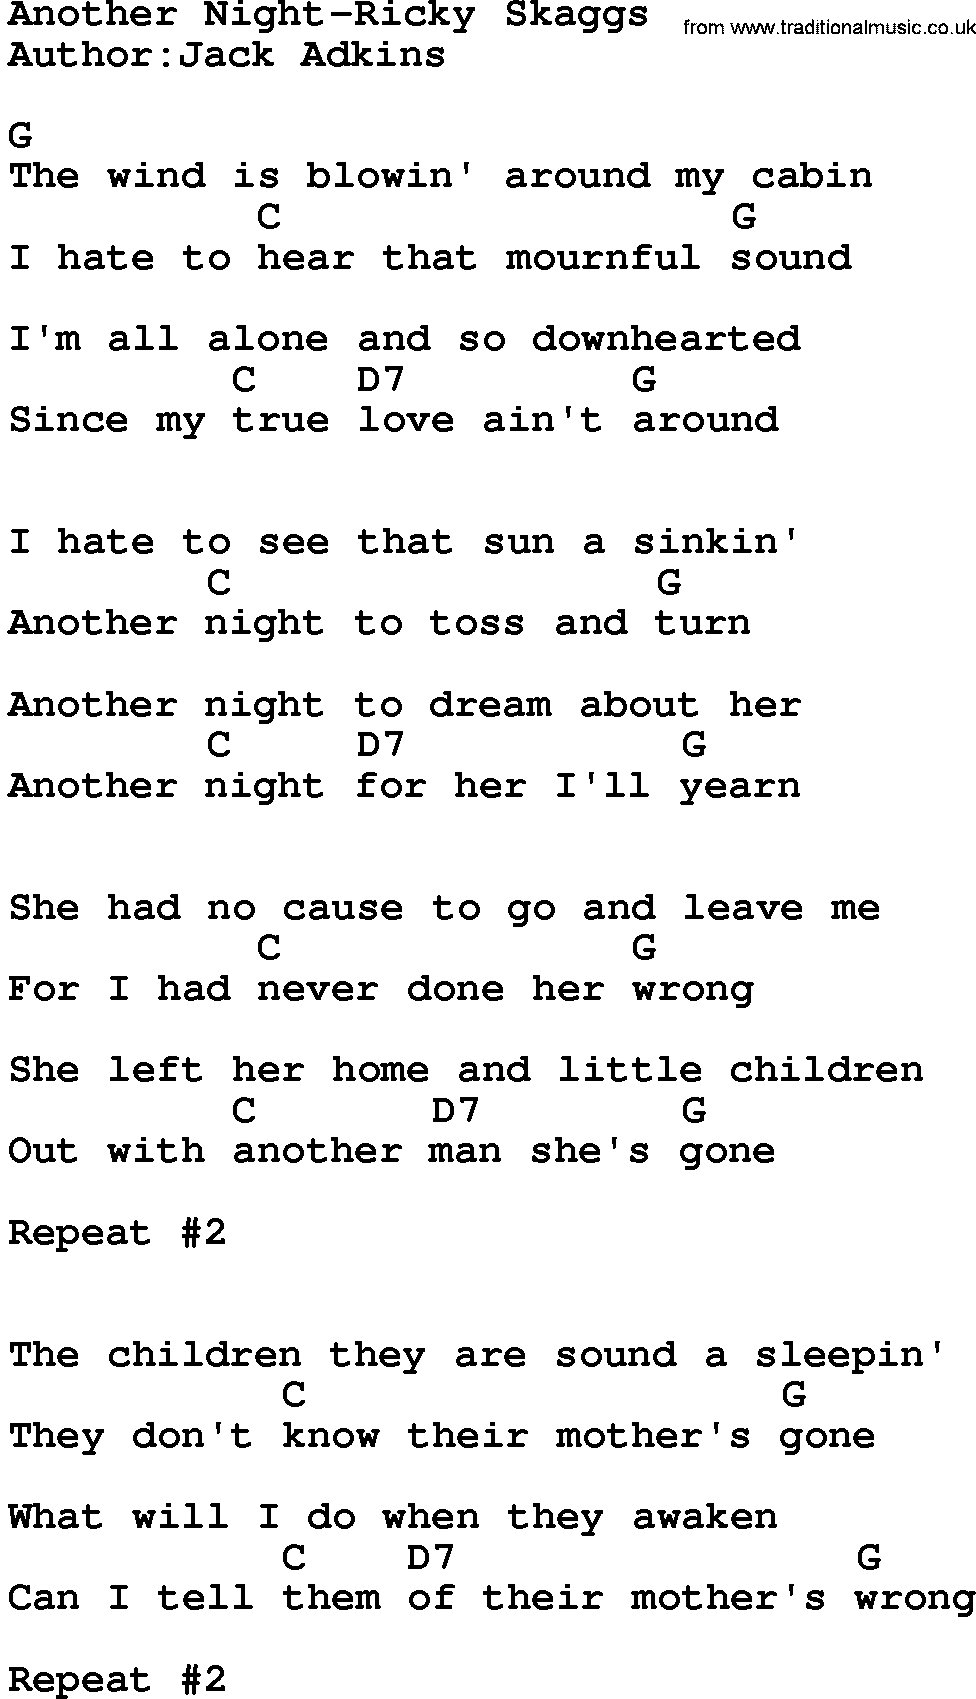 Country music song: Another Night-Ricky Skaggs lyrics and chords